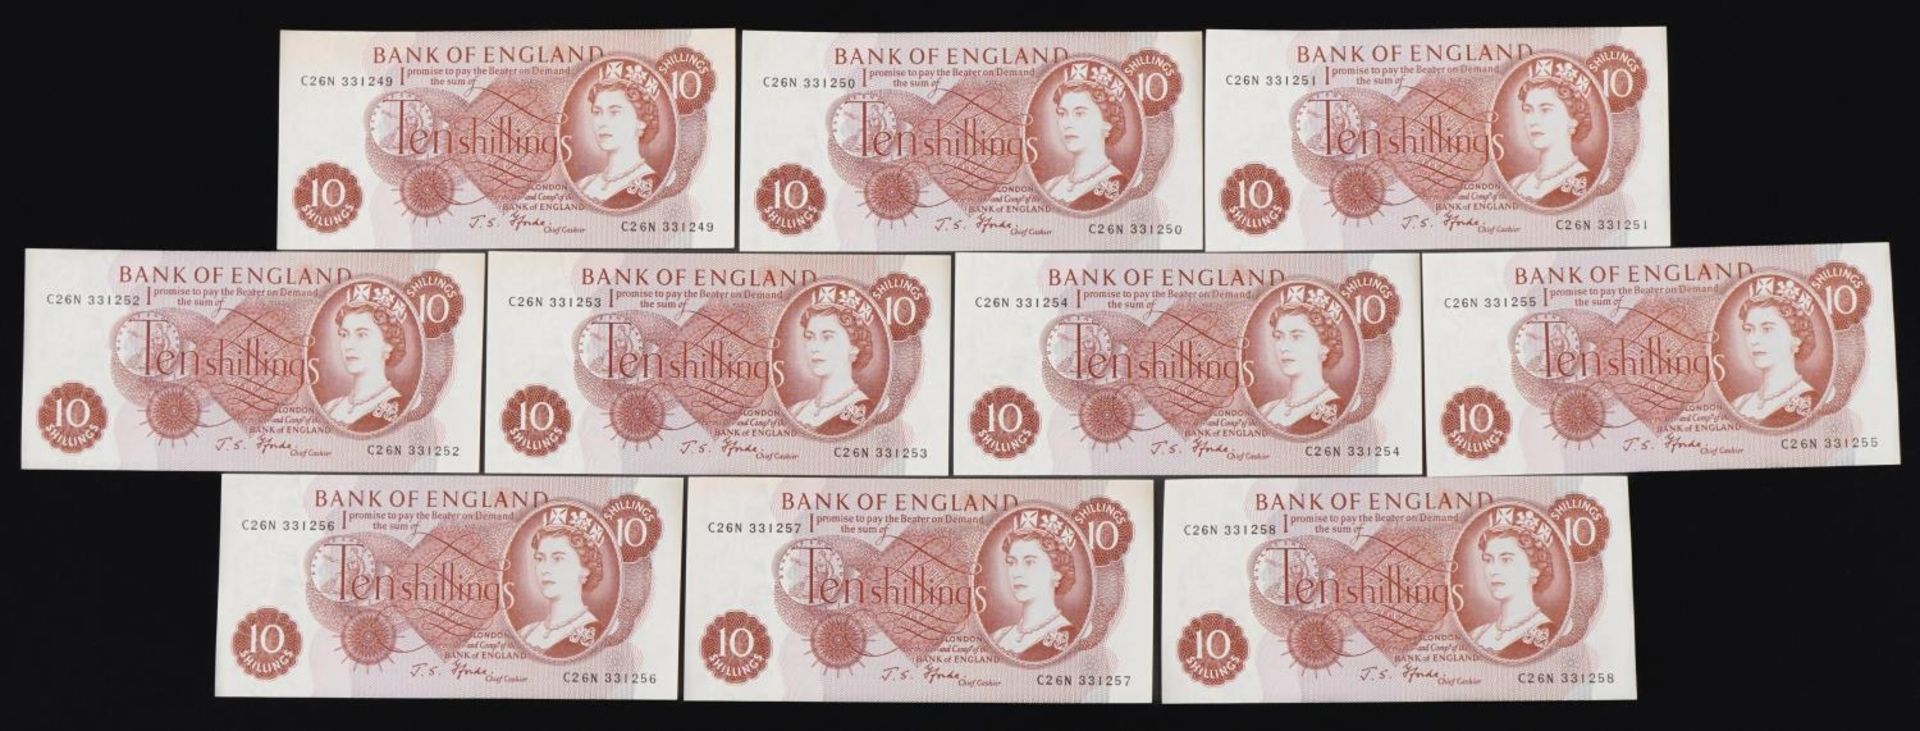 Ten Elizabeth II Bank of England ten shilling bank notes with consecutive serial numbers, Chief